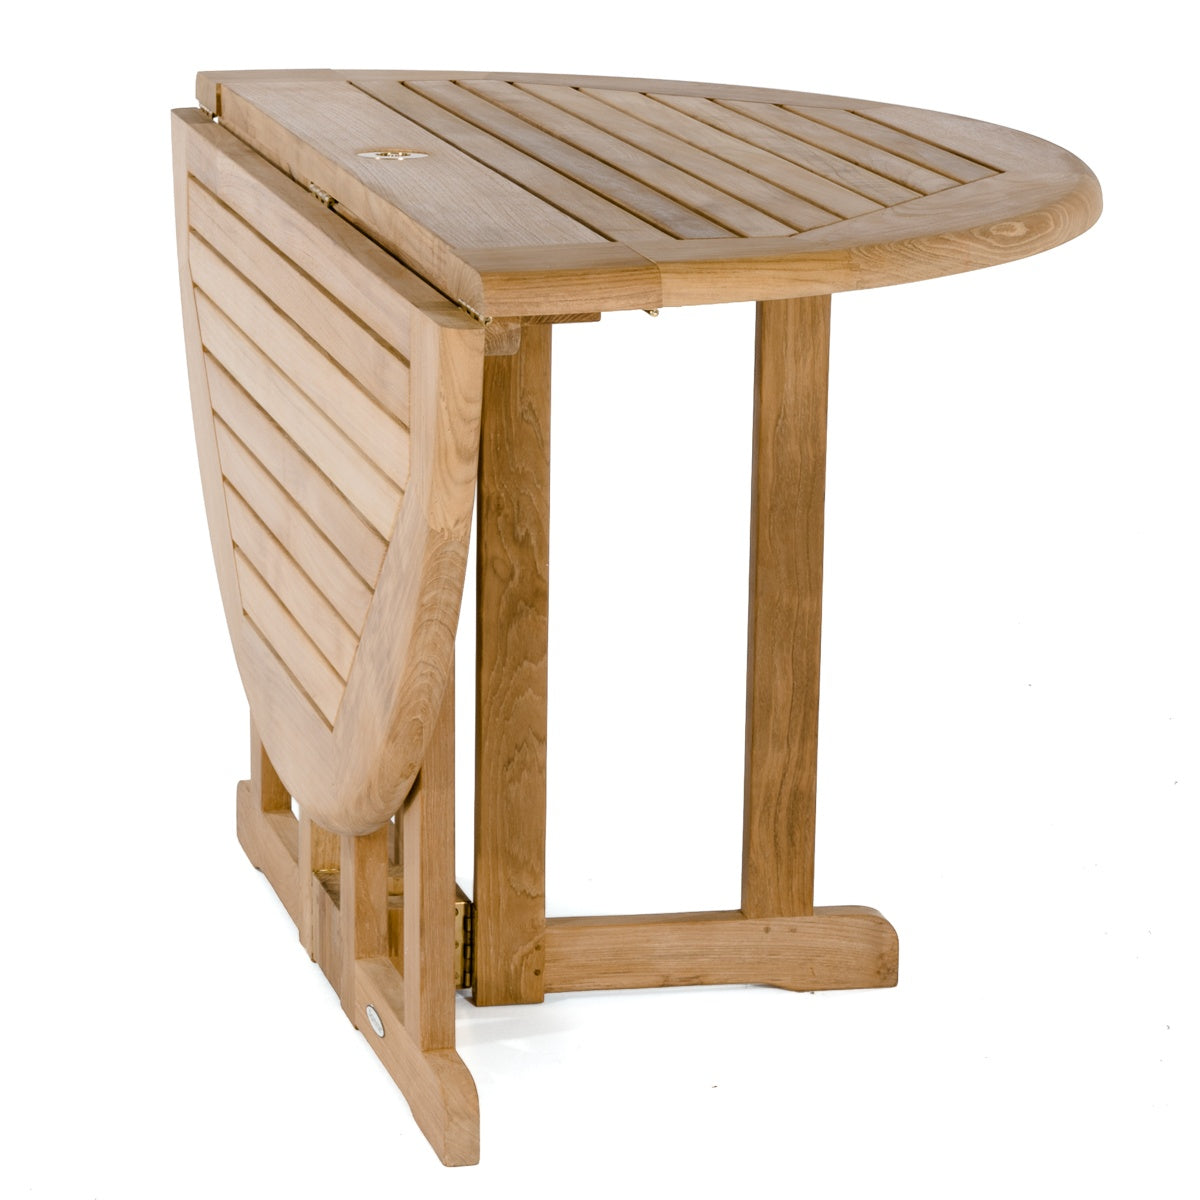 Westminster Teak - Barbuda Table Replaced by 15623S - 15623